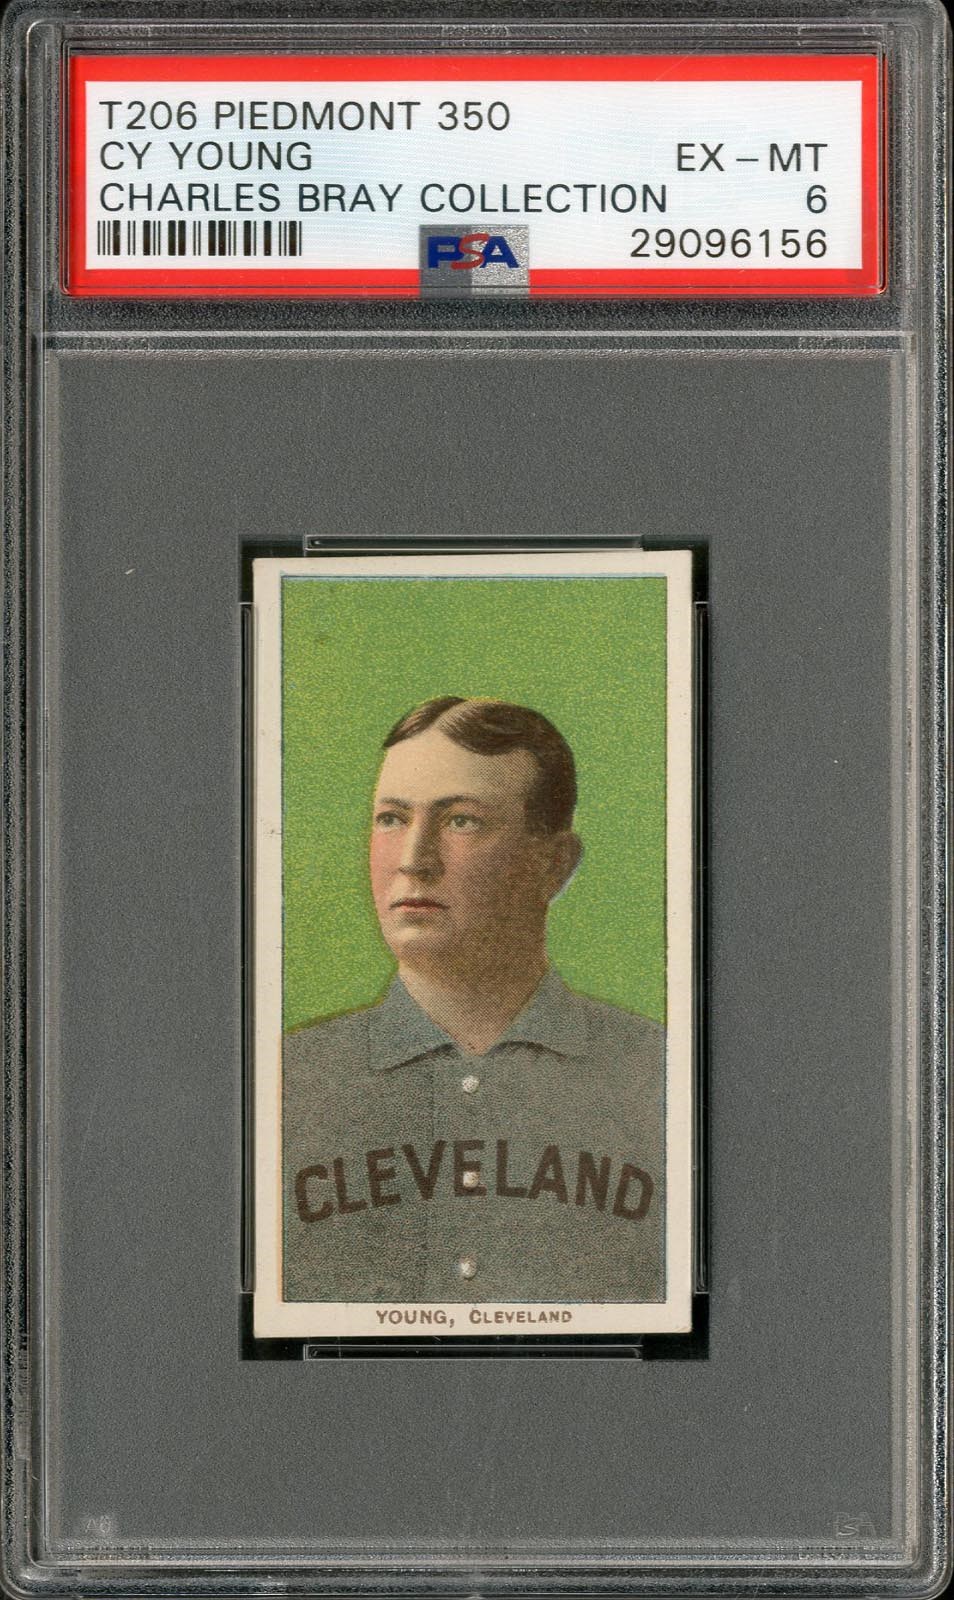 - T206 Piedmont 350 Cy Young PSA EX-MT 6 Charles Bray Collection